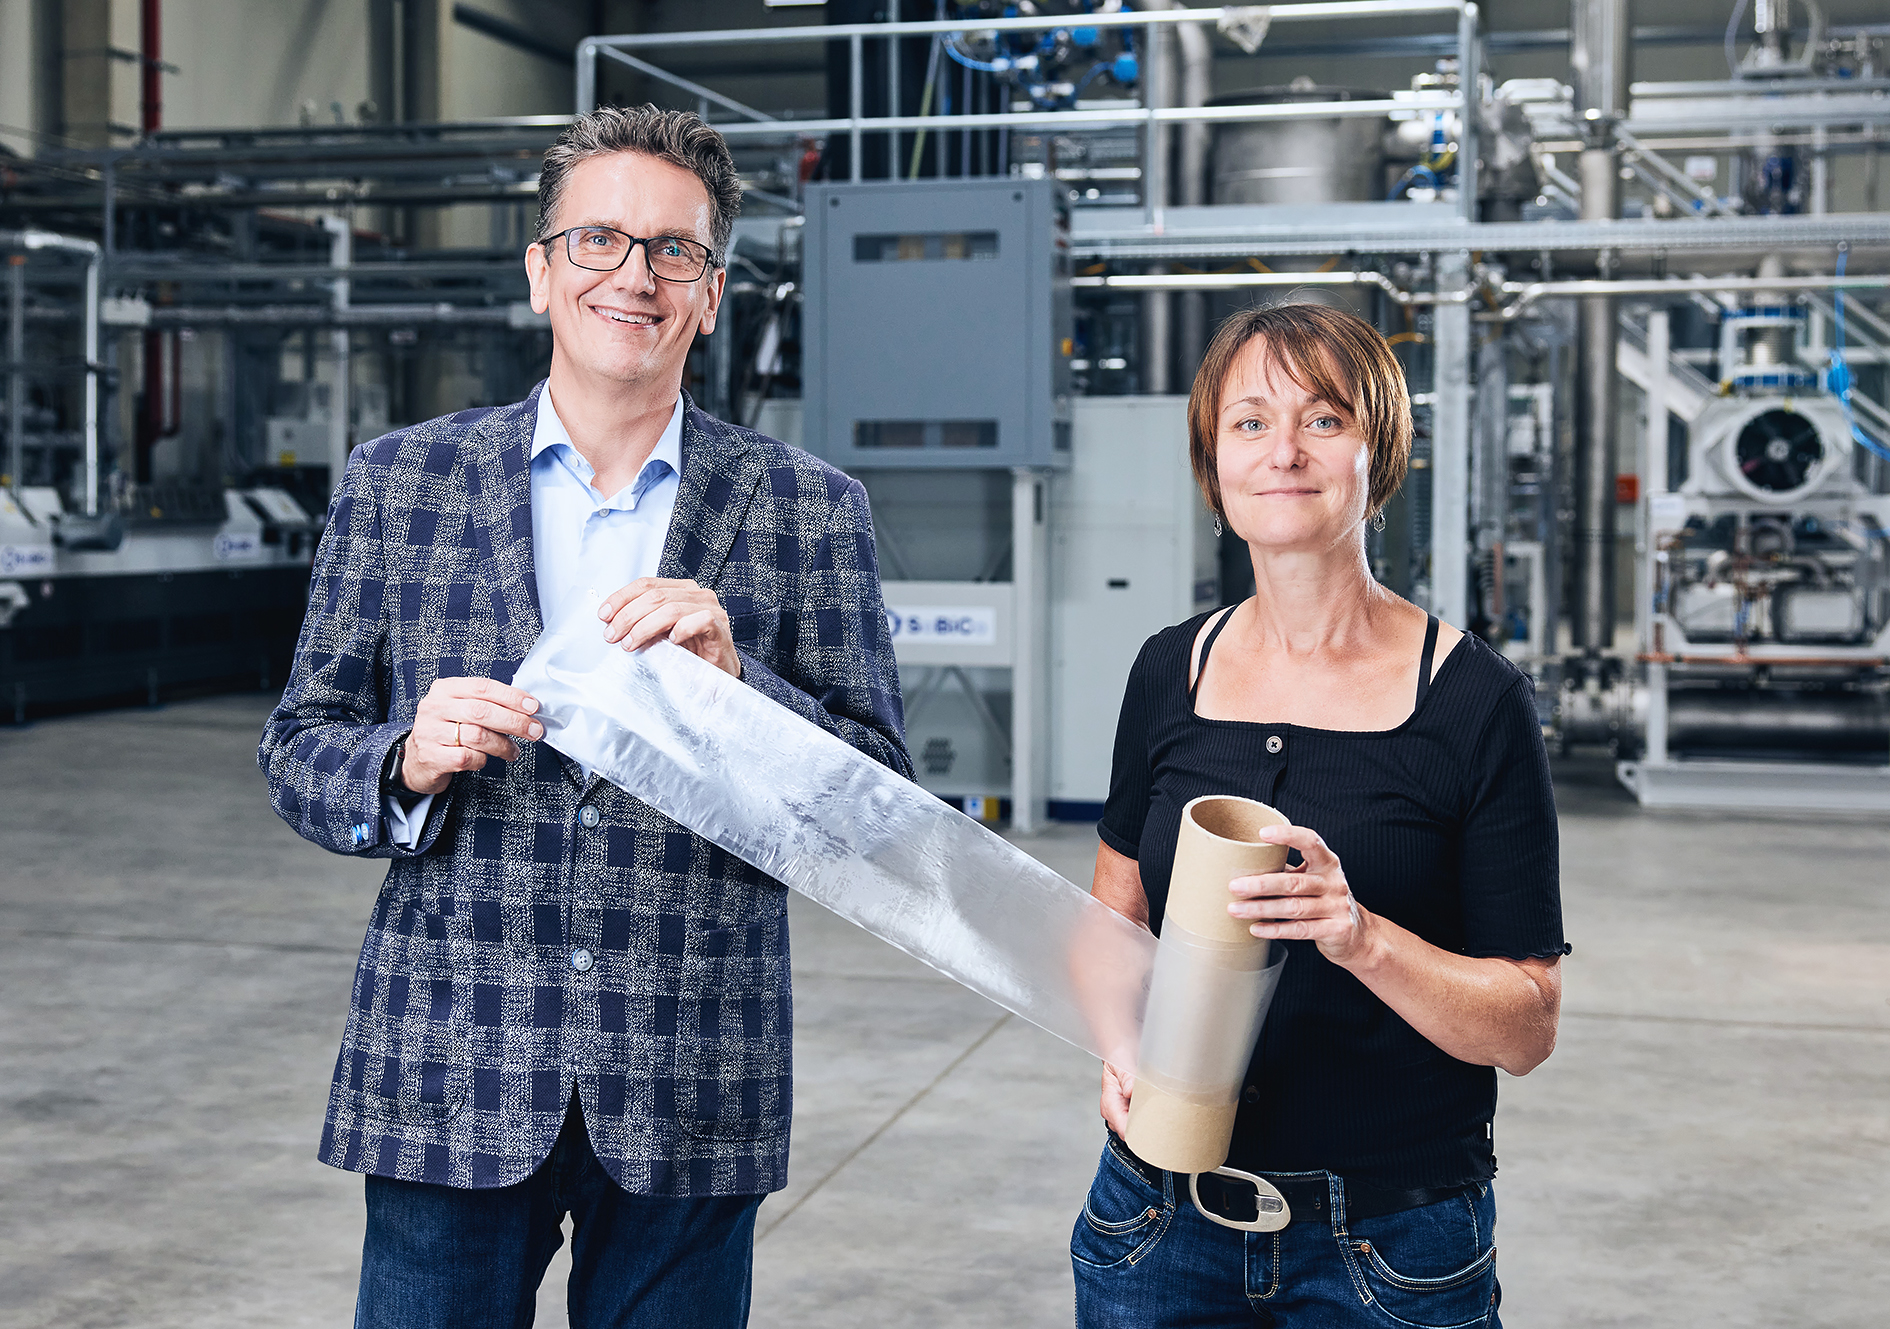 Dr. Gerald Hauf, managing director of the Polymer Group and Dr. Antje Lieske, head of department "Polymer Synthesis" at the Fraunhofer IAP open up new fields of application for bioplastics with innovative PLA copolymers. 